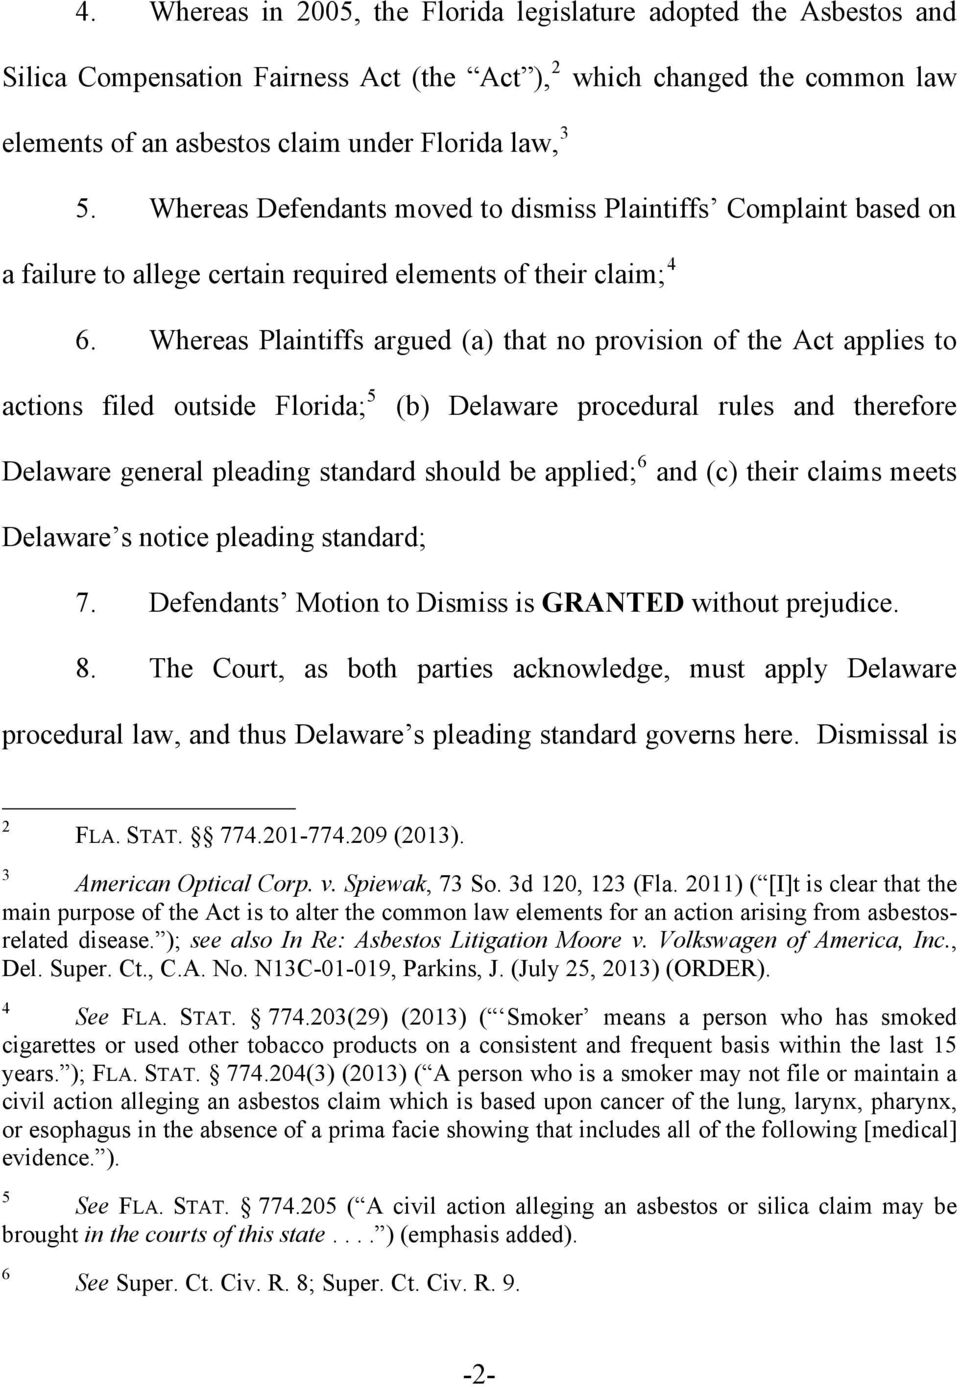 Whereas Plaintiffs argued (a that no provision of the Act applies to actions filed outside Florida; 5 (b Delaware procedural rules and therefore Delaware general pleading standard should be applied;